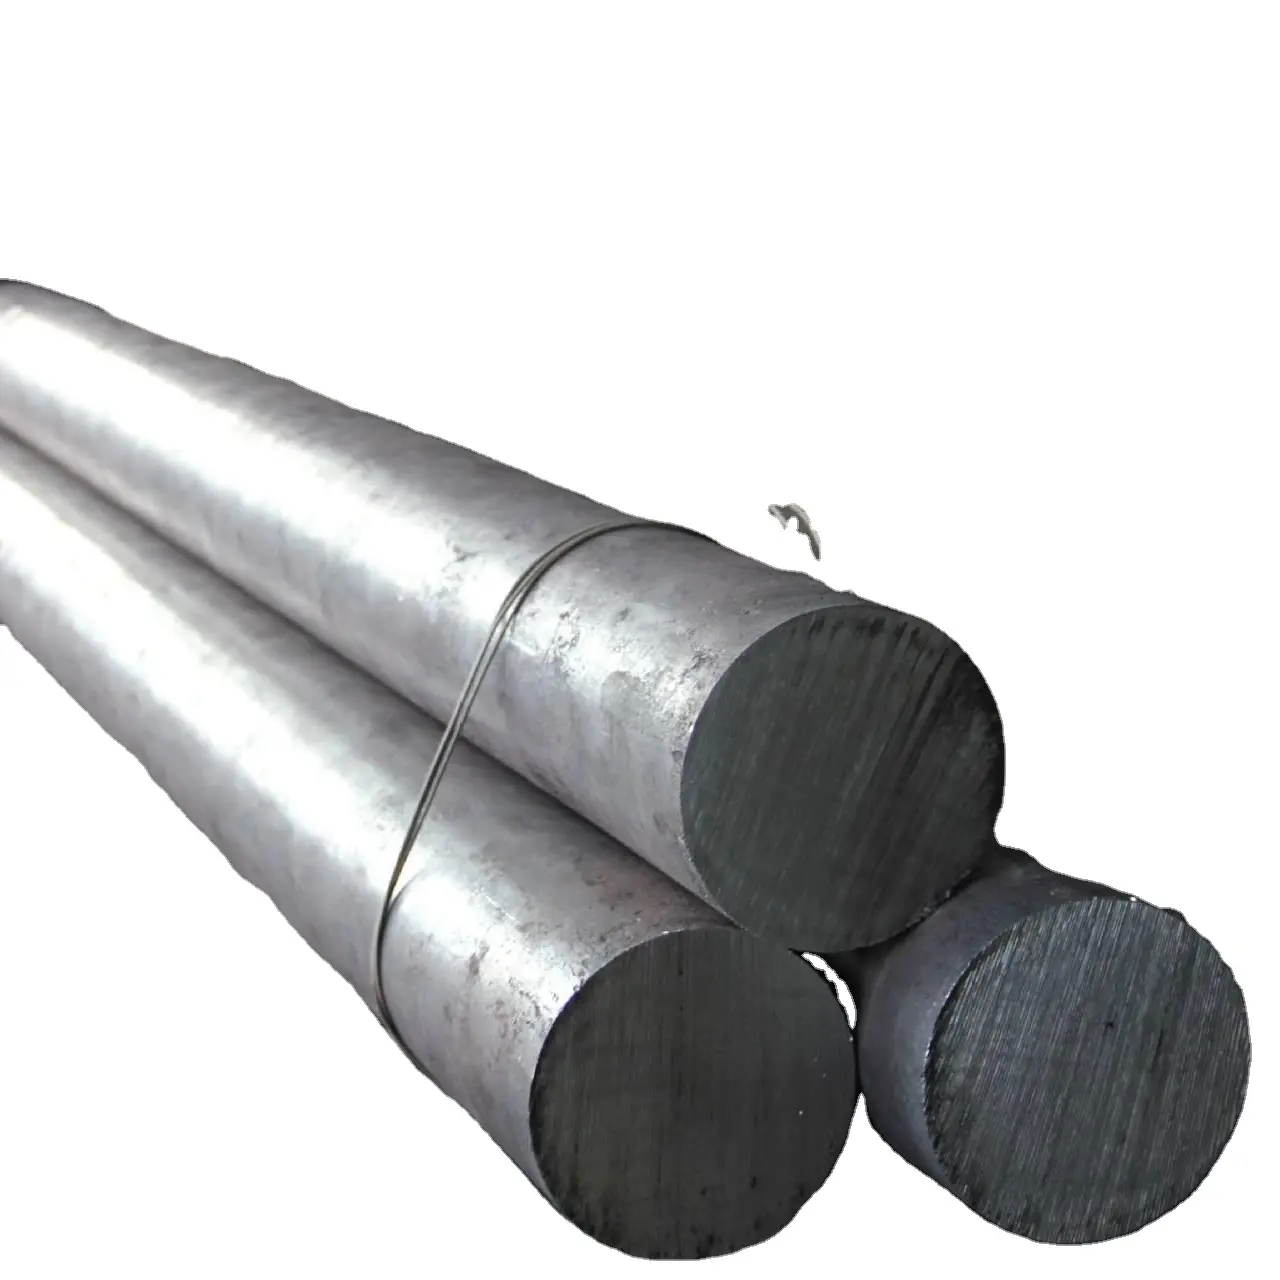 Chinese factory Carbon Steel Round Bar and Chrome Plated Round Bar in stock